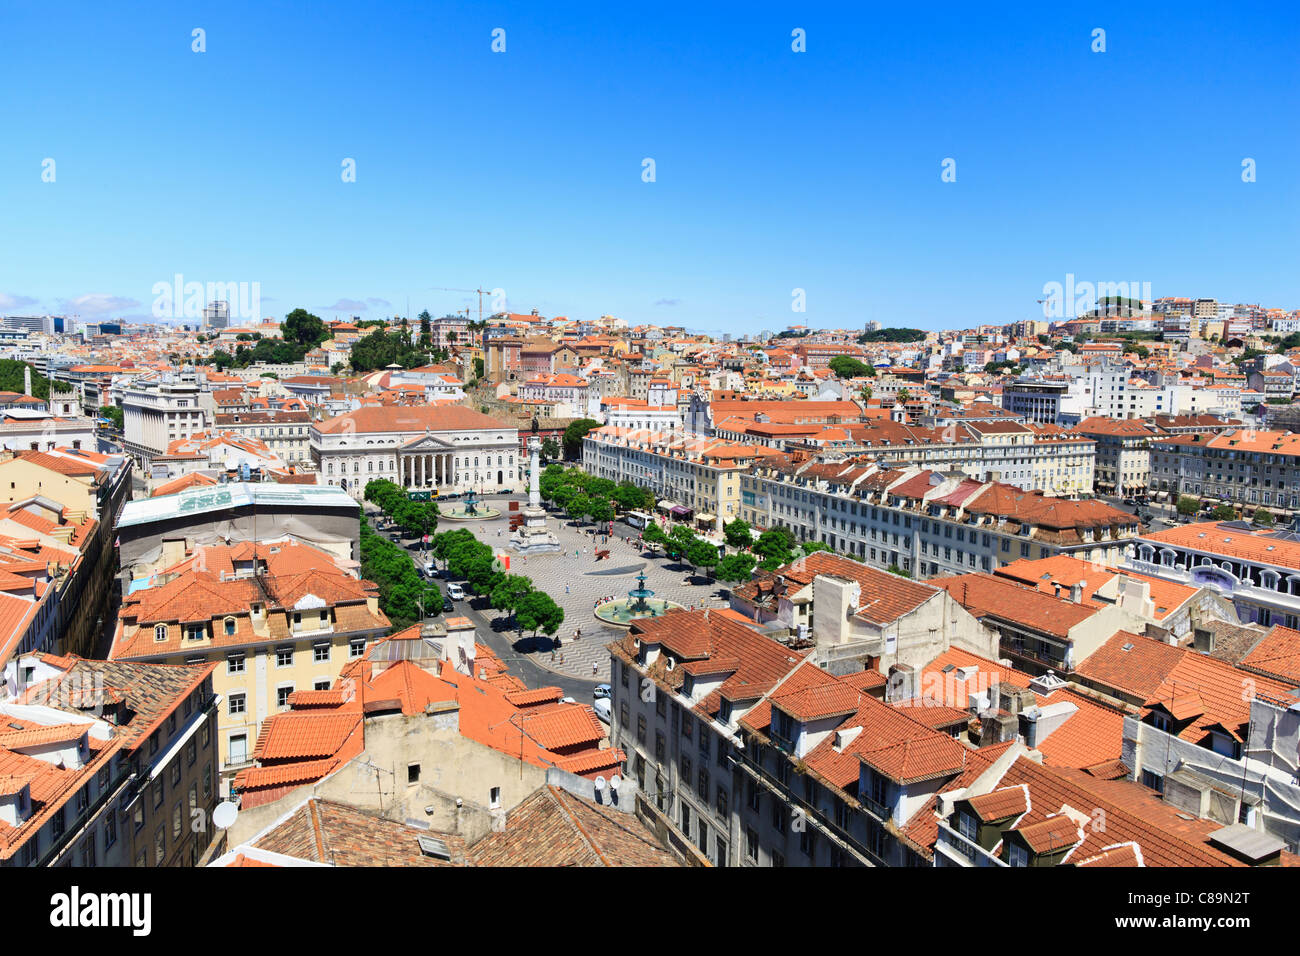 Europe, Portugal, Lisbon, View of city square with statue of Dom Pedro IV Stock Photo